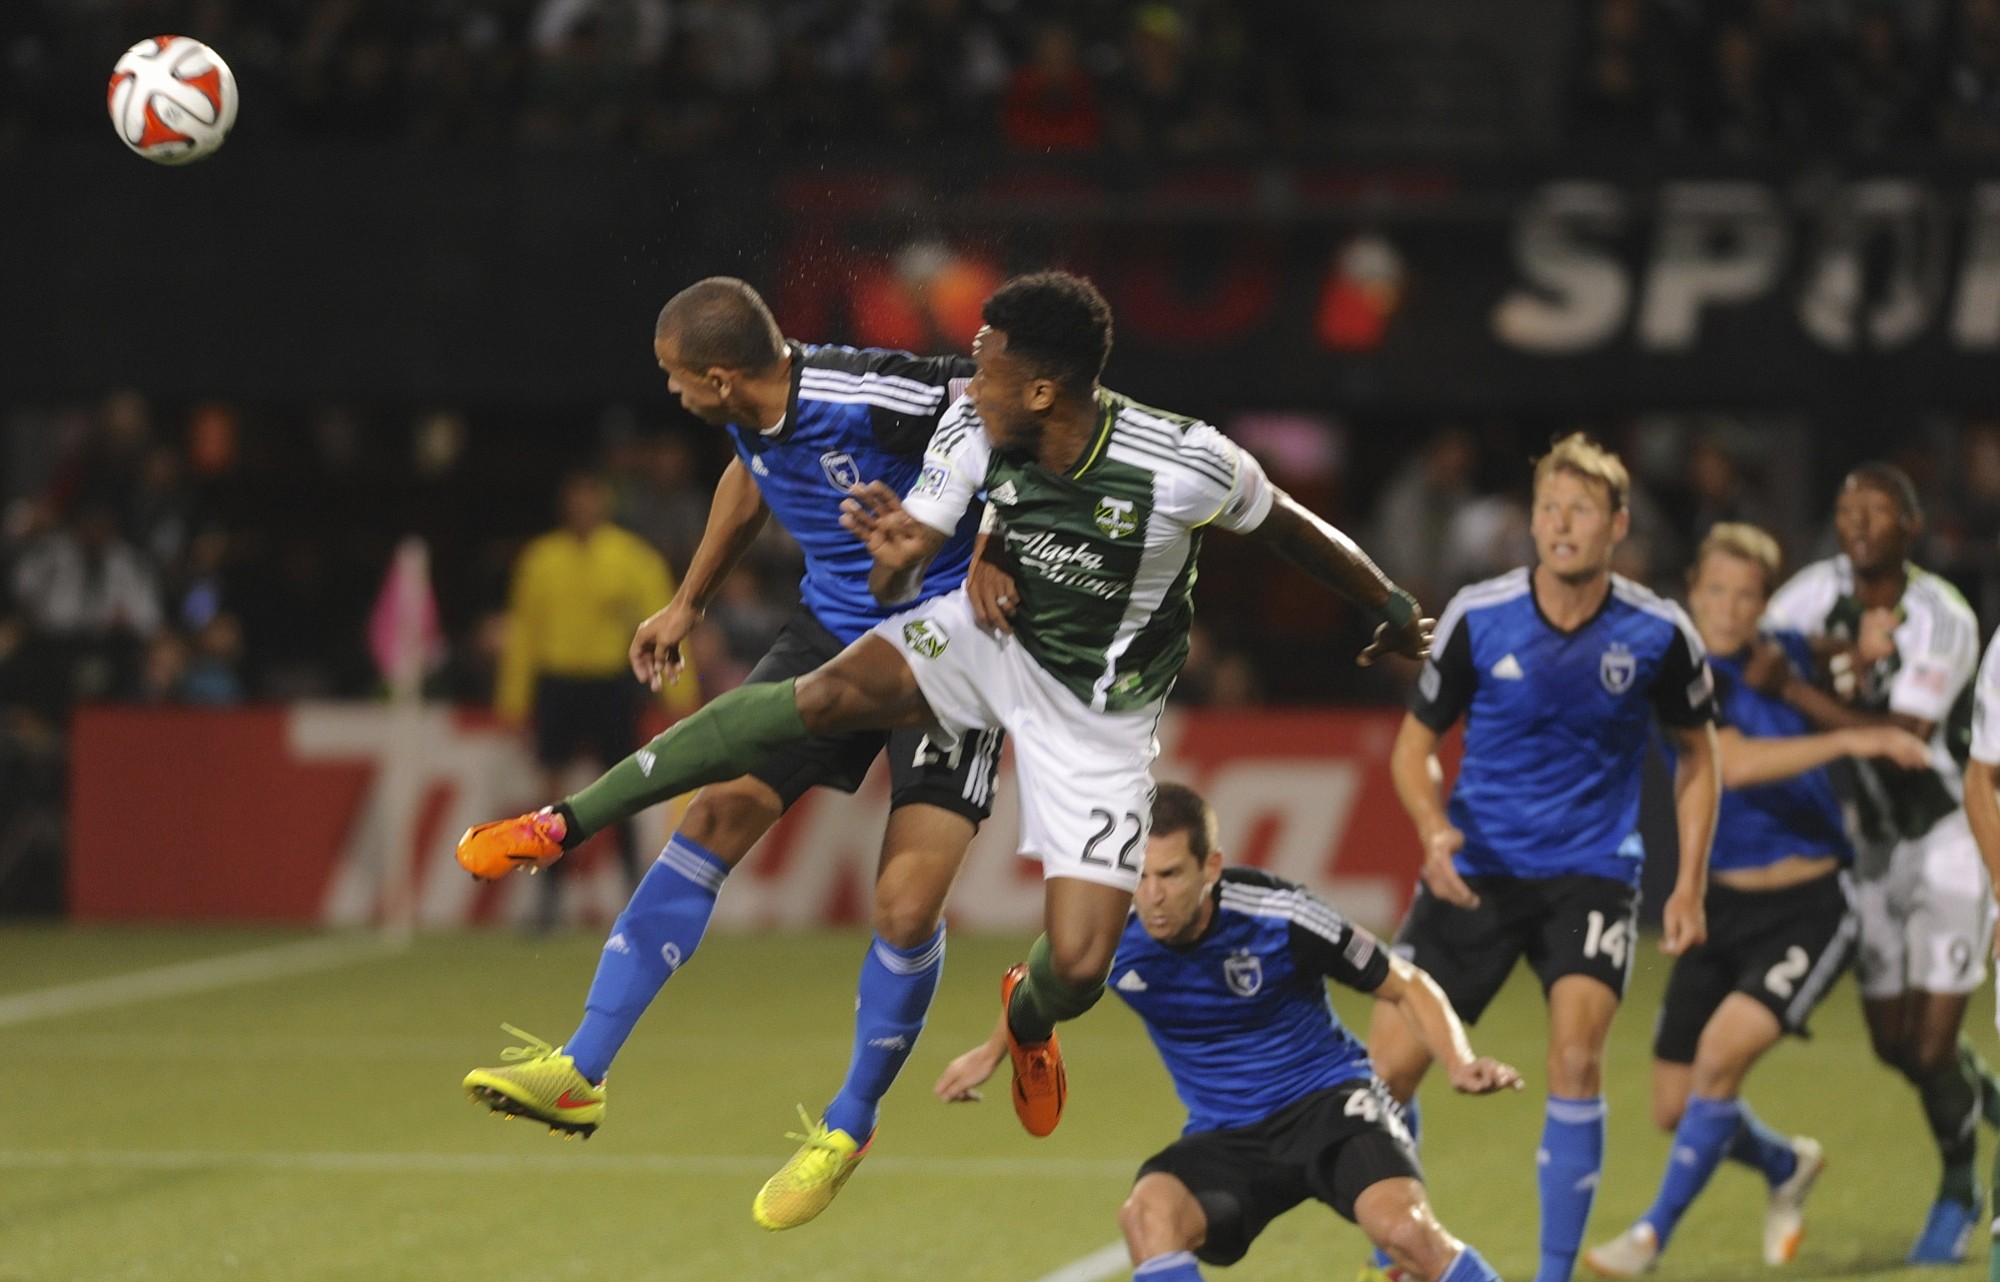 San Jose Earthquakes' Jason Hernandez defends against a shot by Portland Timbers' Rodney Wallace (22) during the first half of an MLS Soccer game in Portland, Ore., Wednesday Oct. 8, 2014.